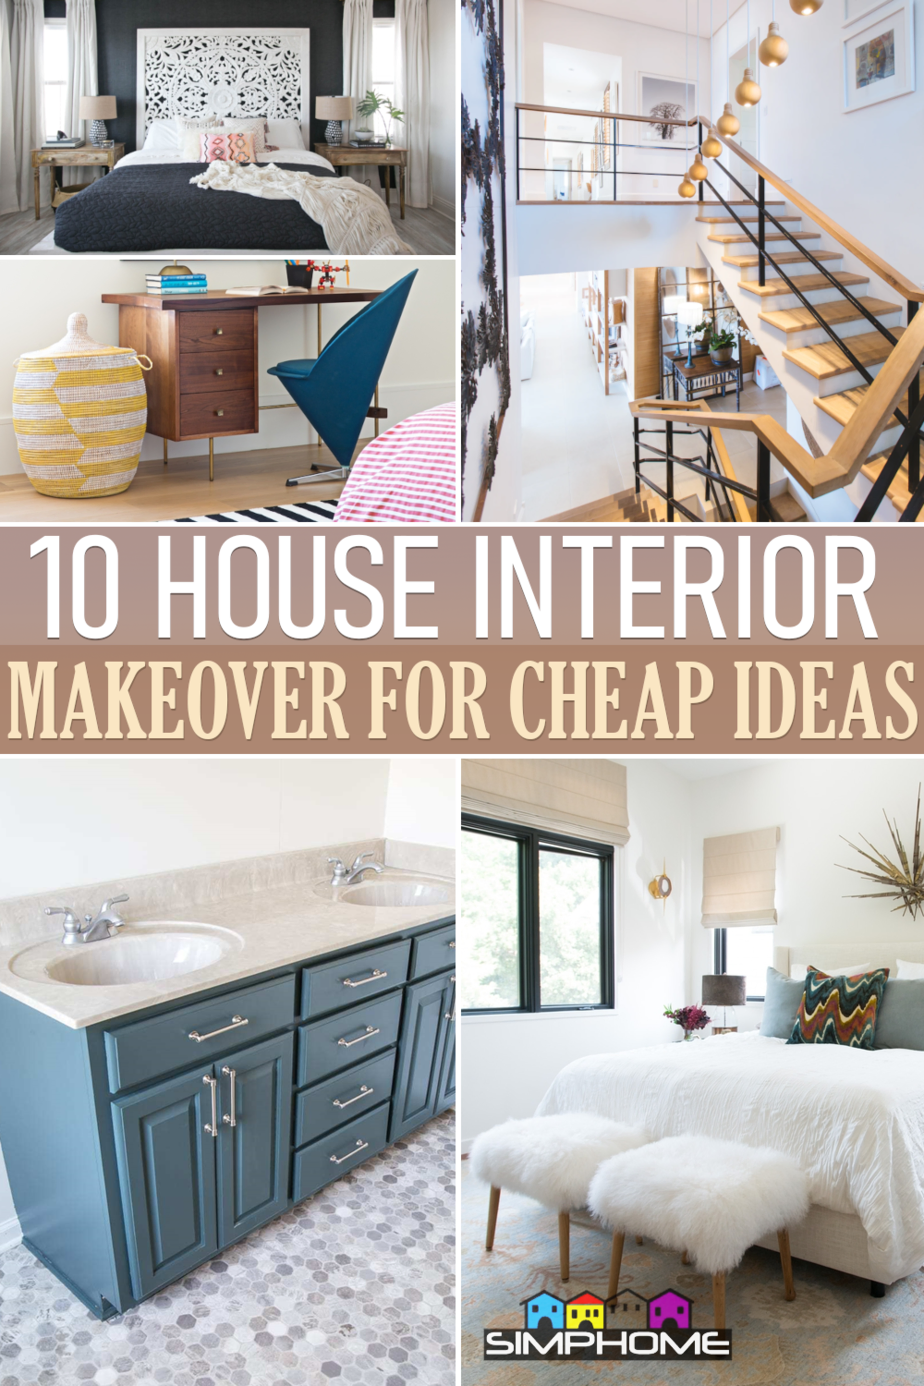 10 How to Update Your House Interior on a Budget via Simphome.comFeatured